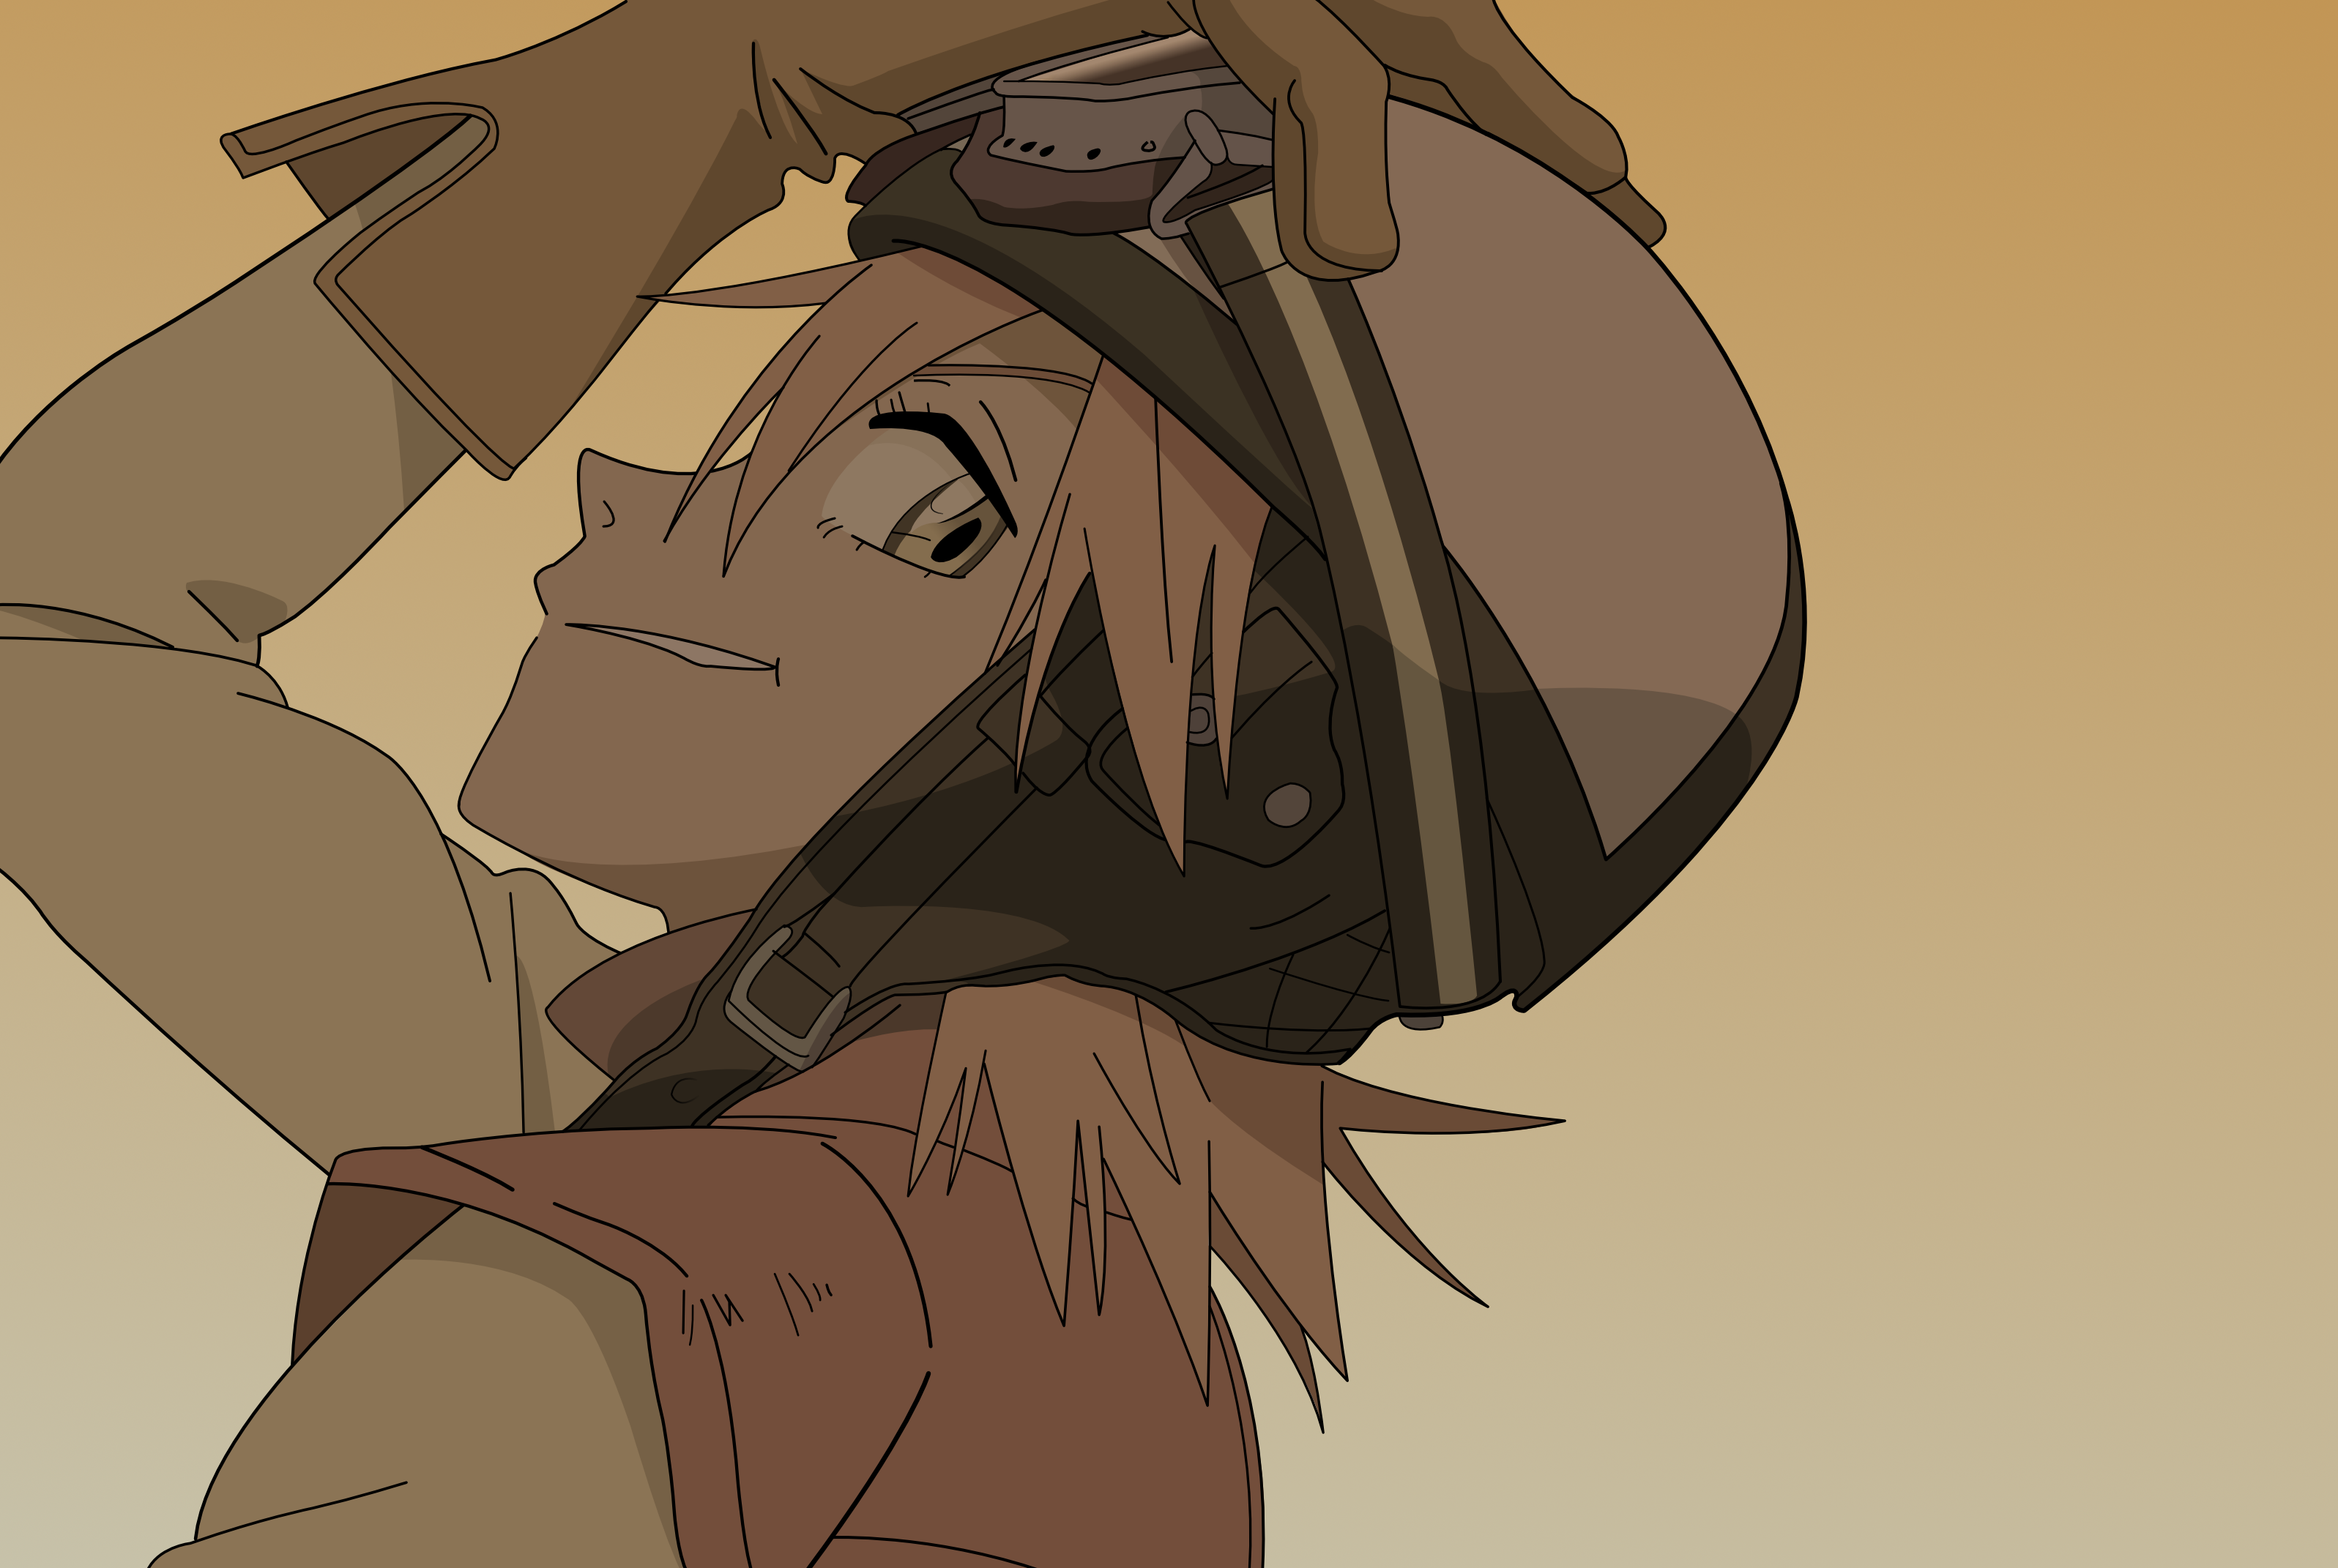 Anime 3193x2142 FLCL anime girls anime face smiling helmet closeup simple background hair in face gloves